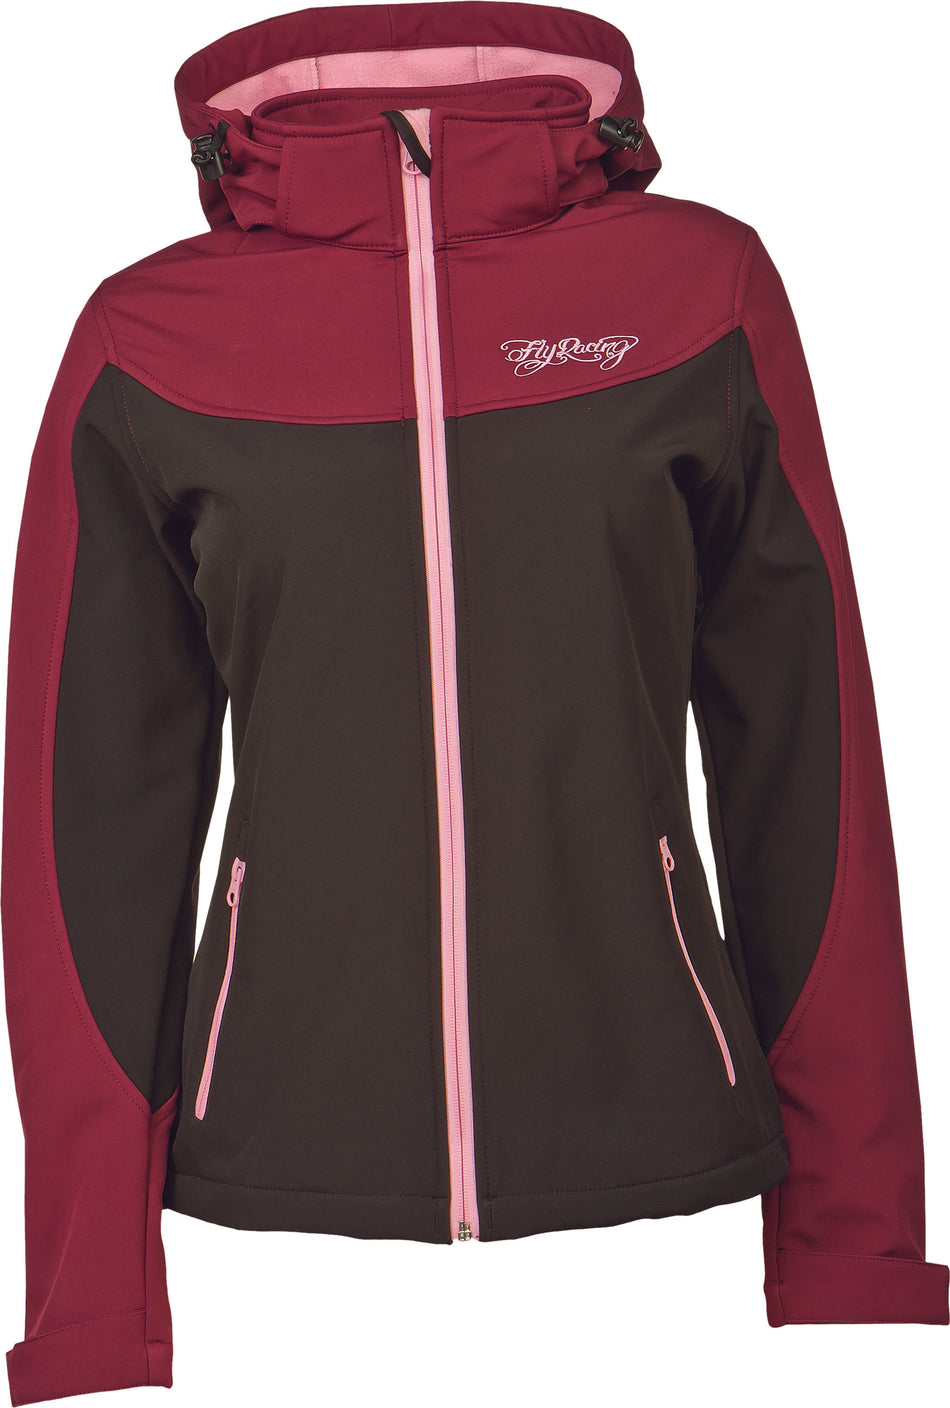 FLY RACING Pinned & Needles Jacket Berry/Black S 358-5118S